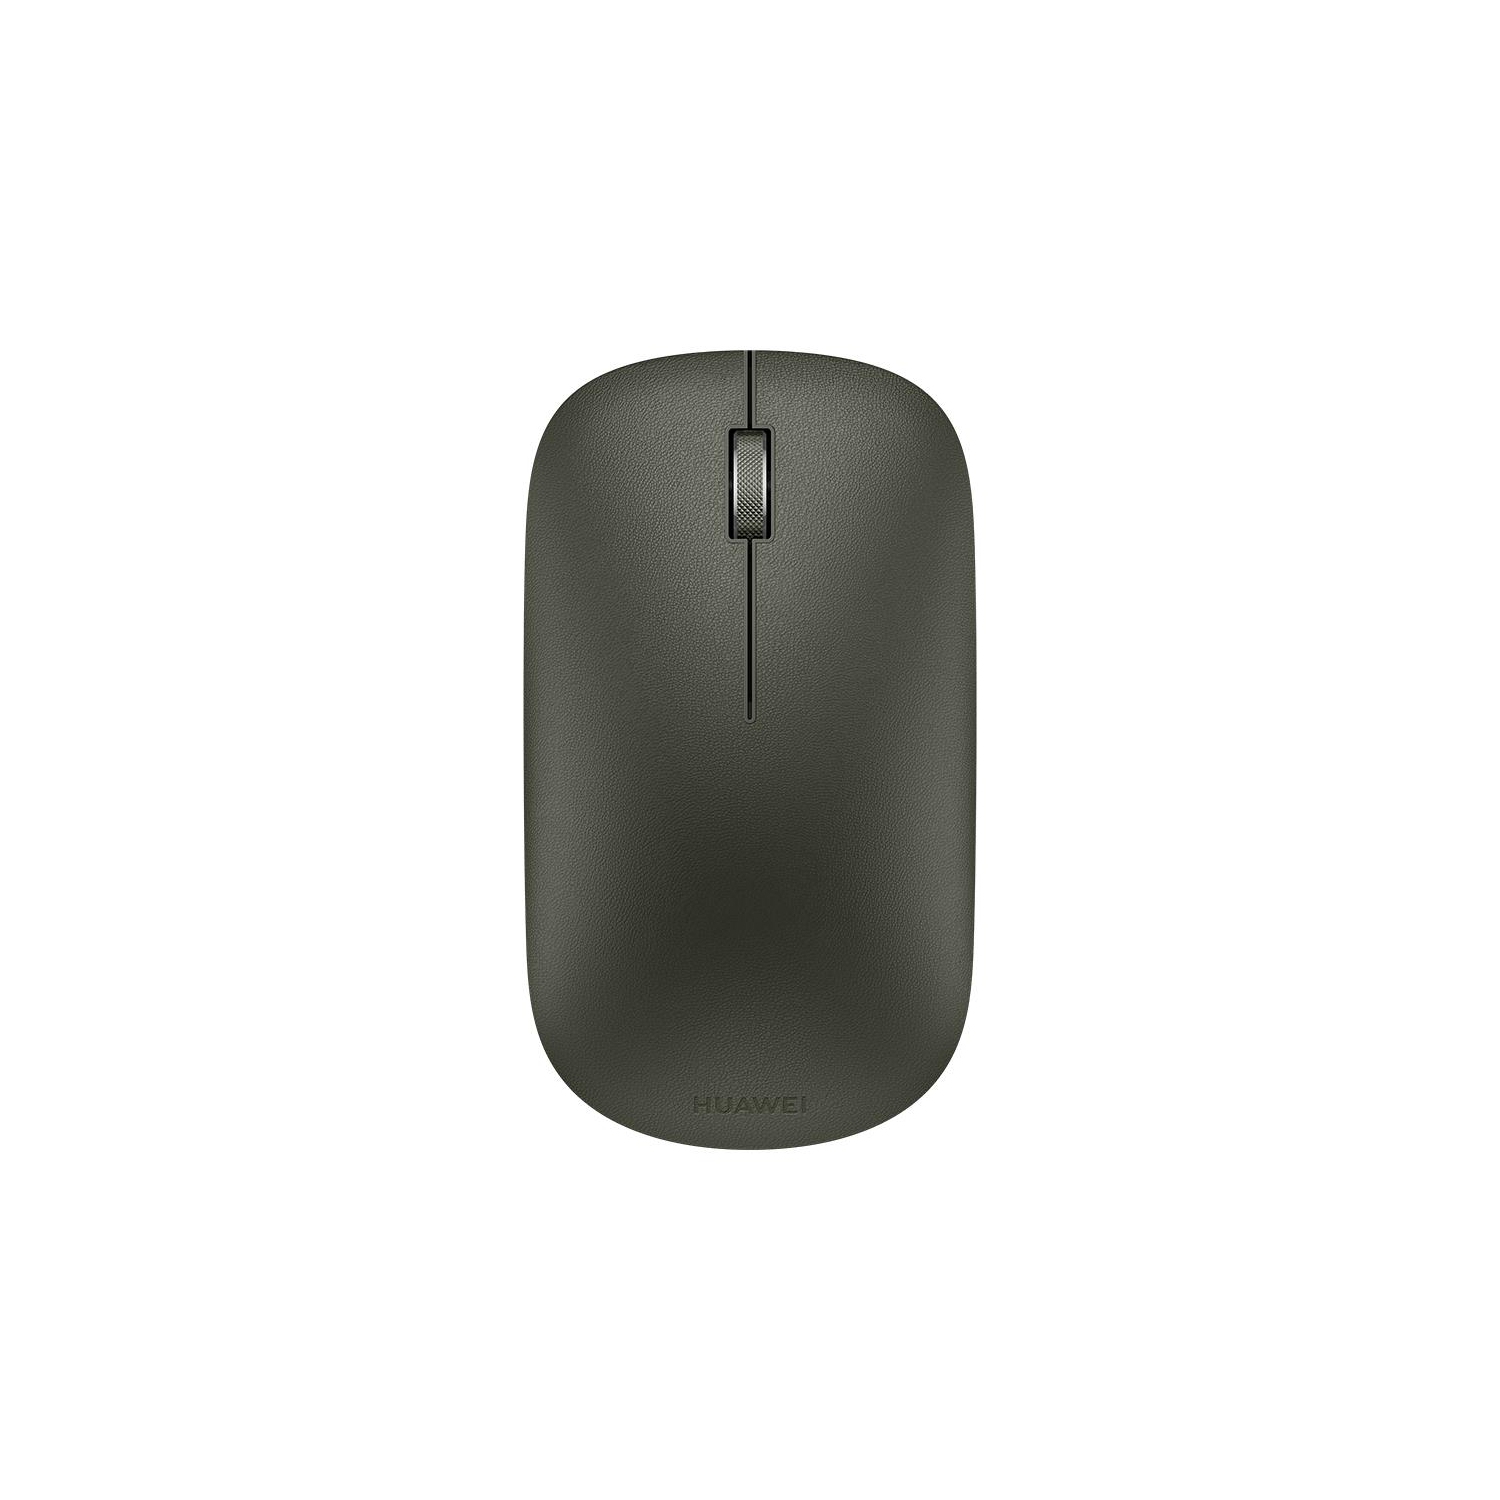 HUAWEI Bluetooth Mouse (2nd gen), Bluetooth 5.0/LE, Win 10/8.1, macOS 10.10, iOS 13.1, HarmonyOS 2.0 or Later, Android 5.0 or Later, Linux, AA Battery, 1200/4200 DPI, Olive Green